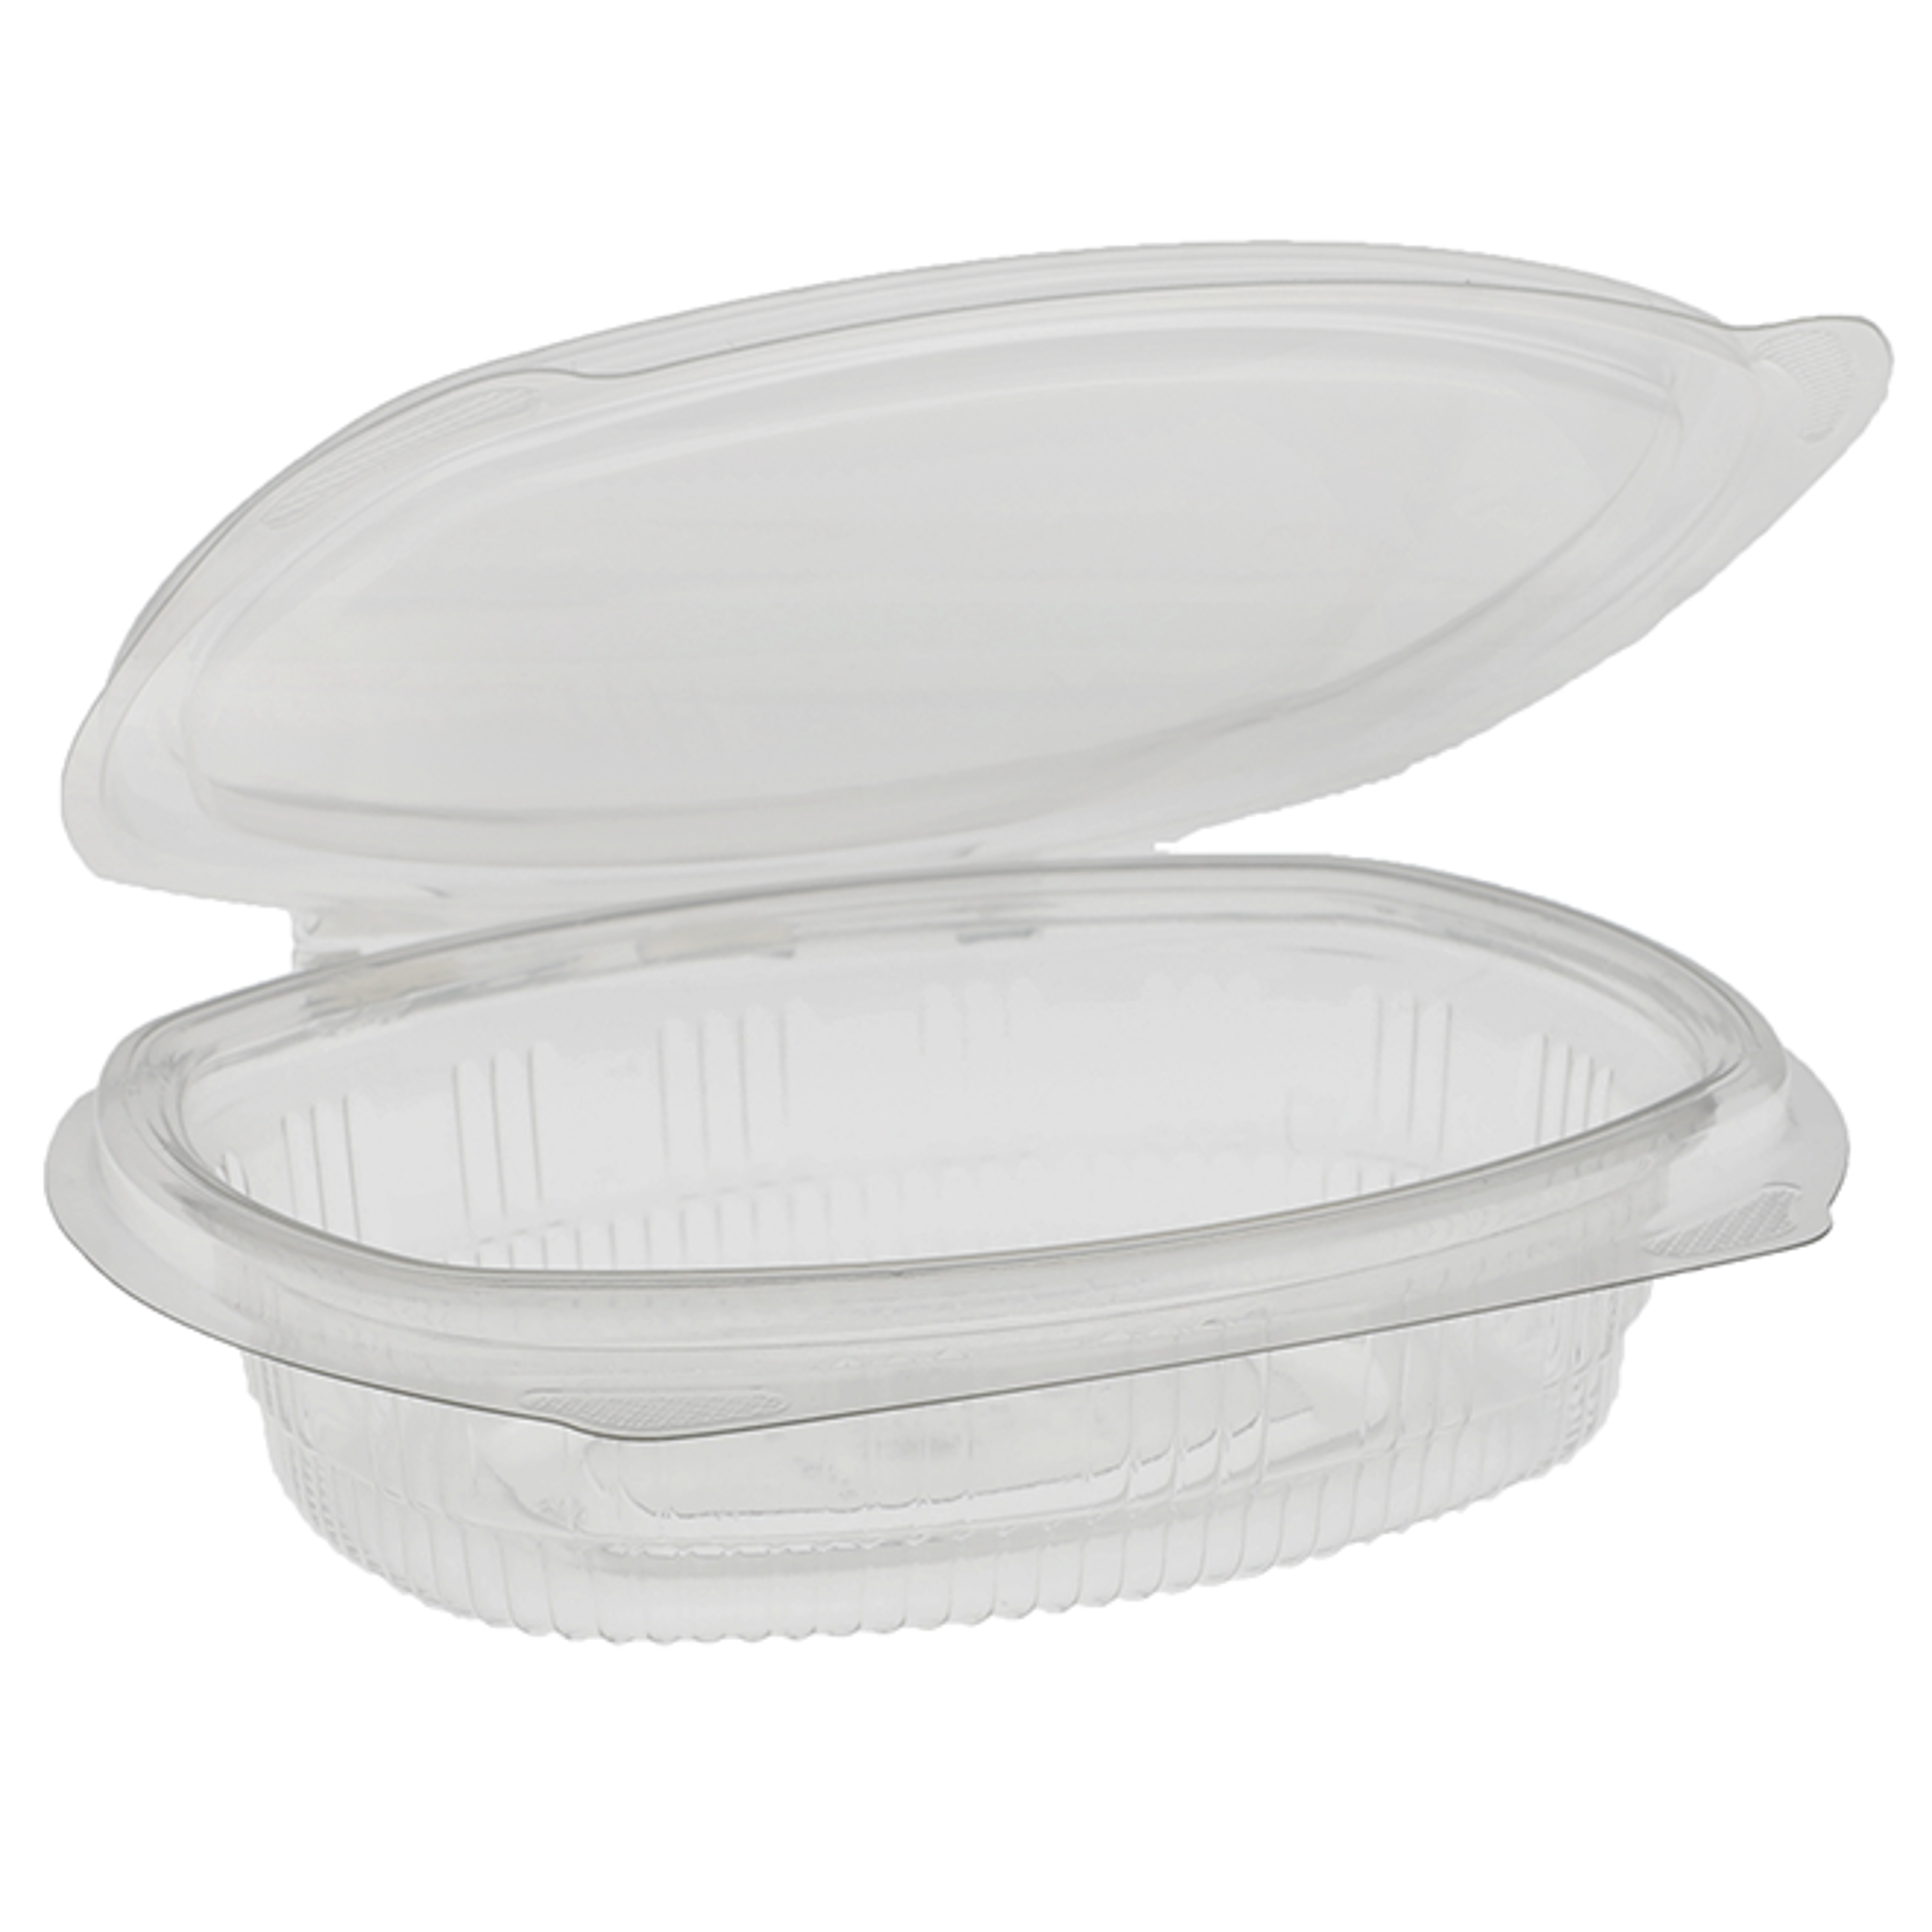 resq® Sandwich Container - Recyclable packaging